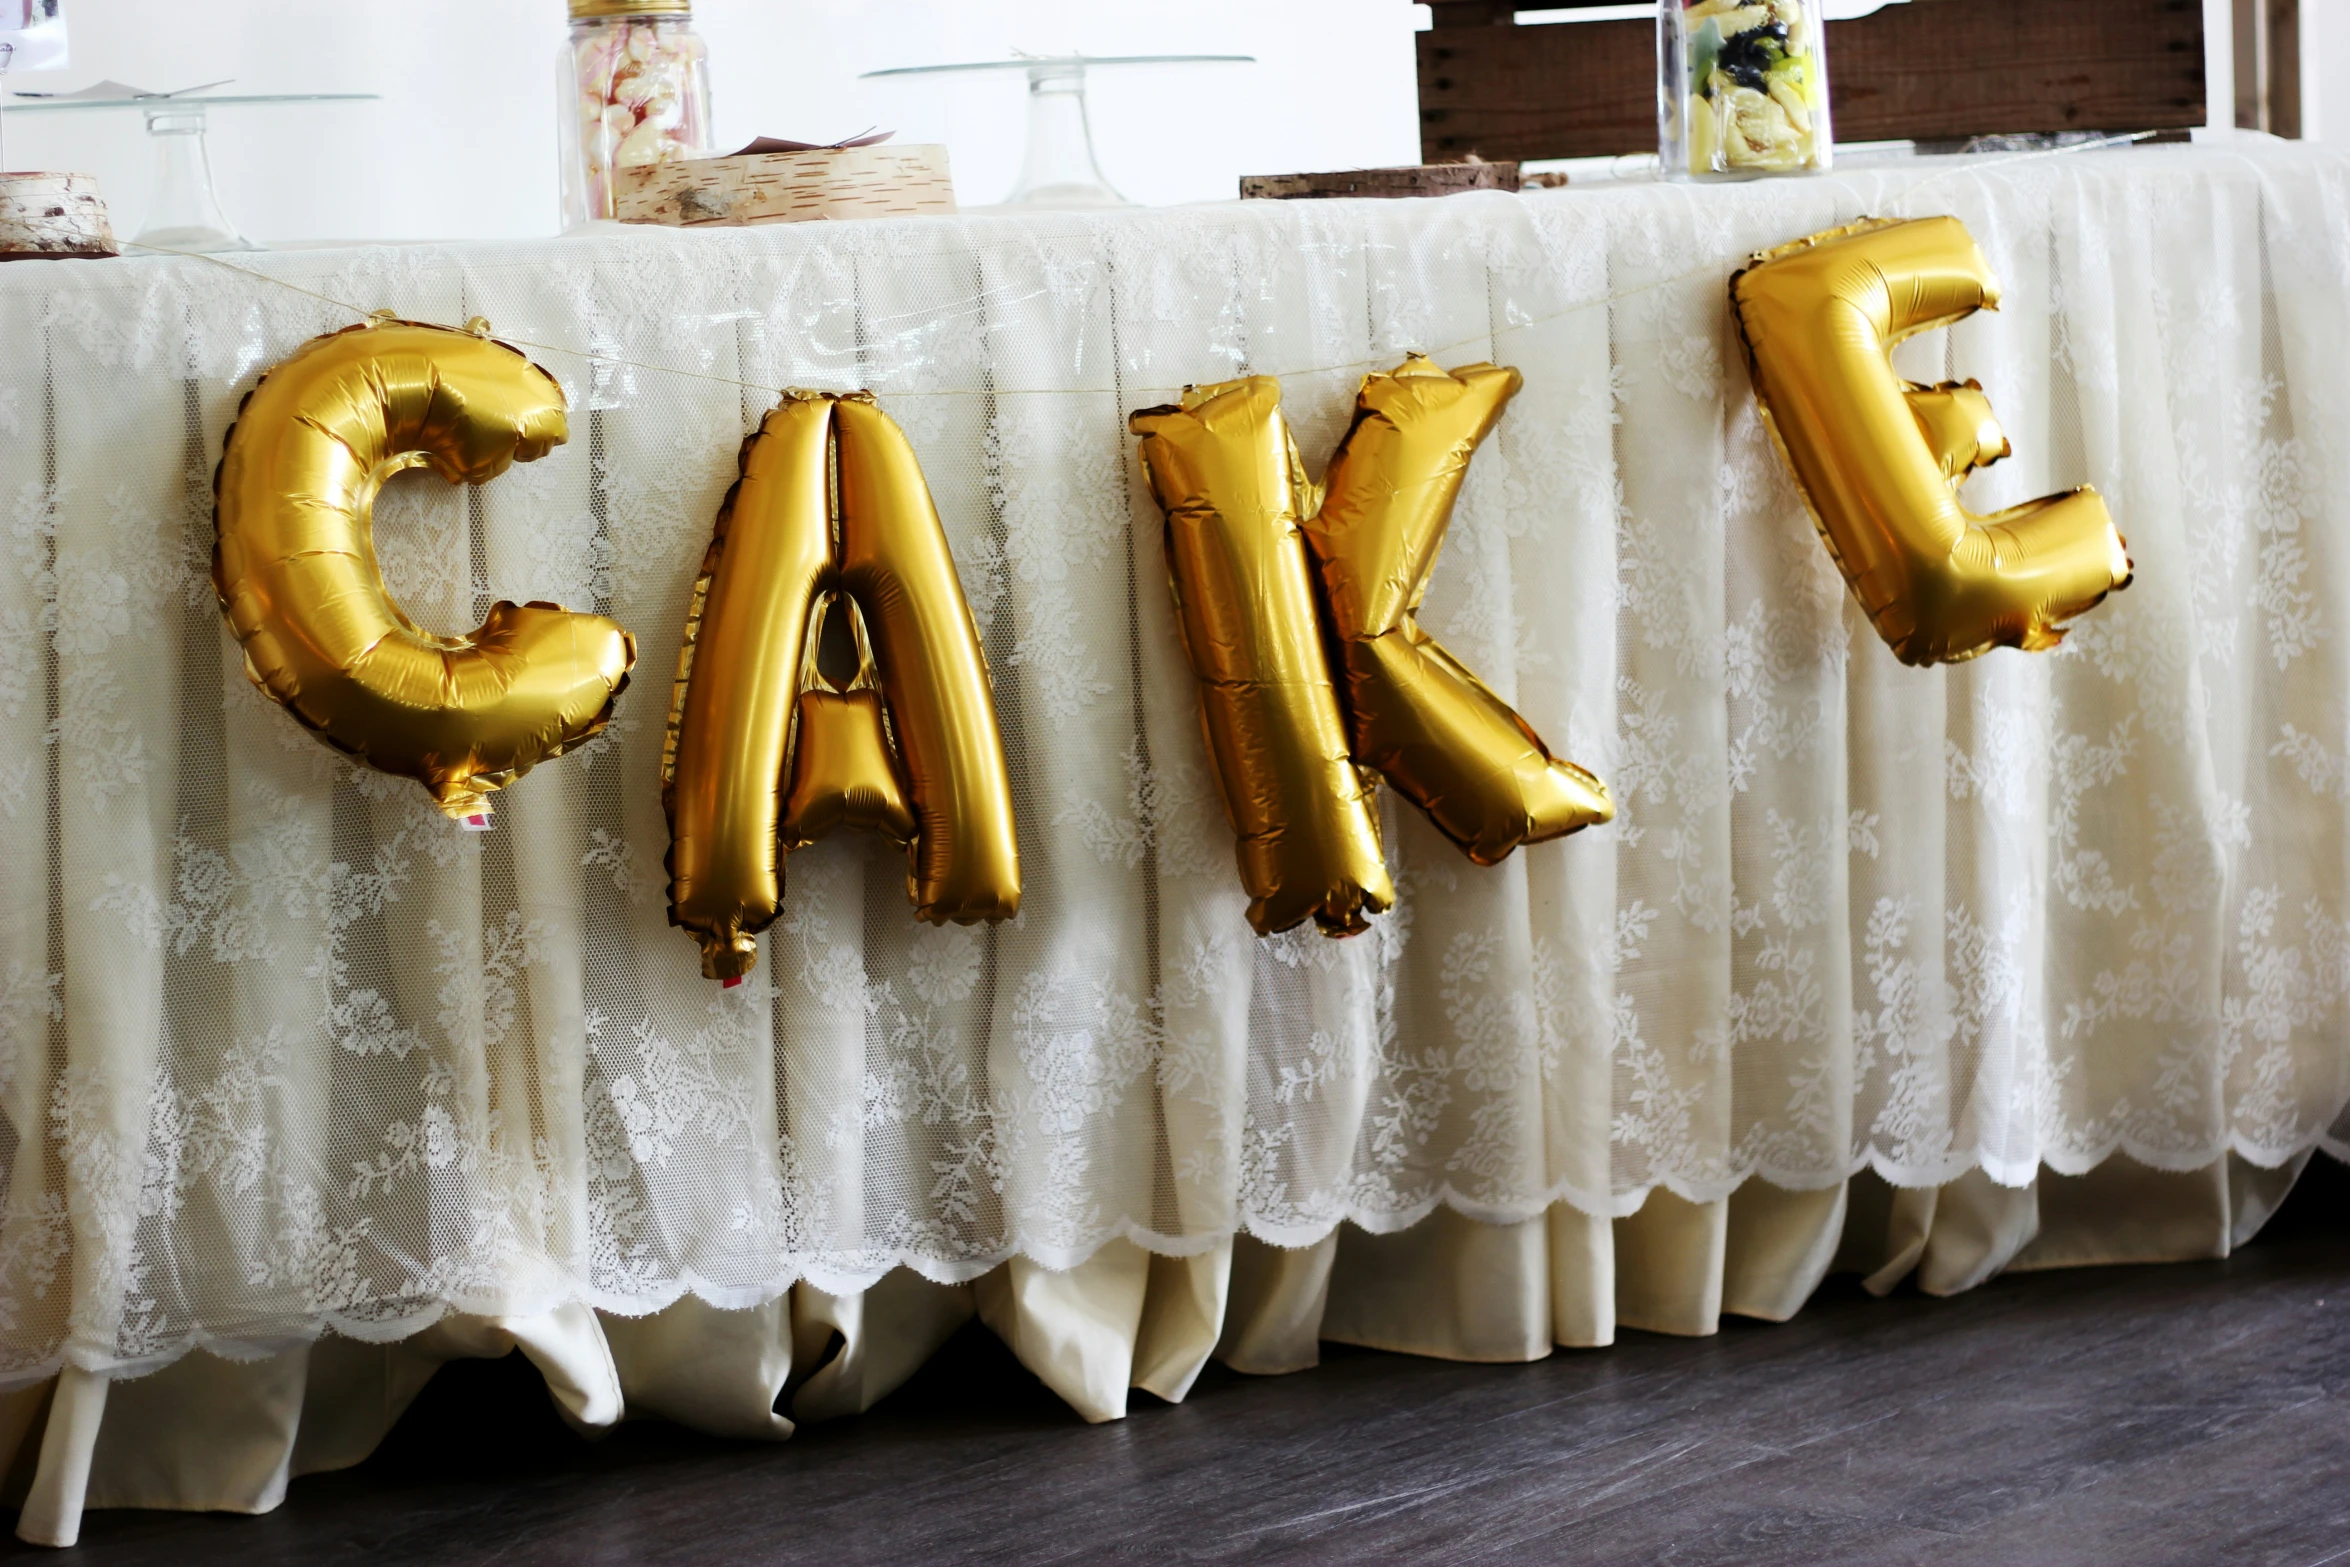 balloons are displayed on the table with the word cake